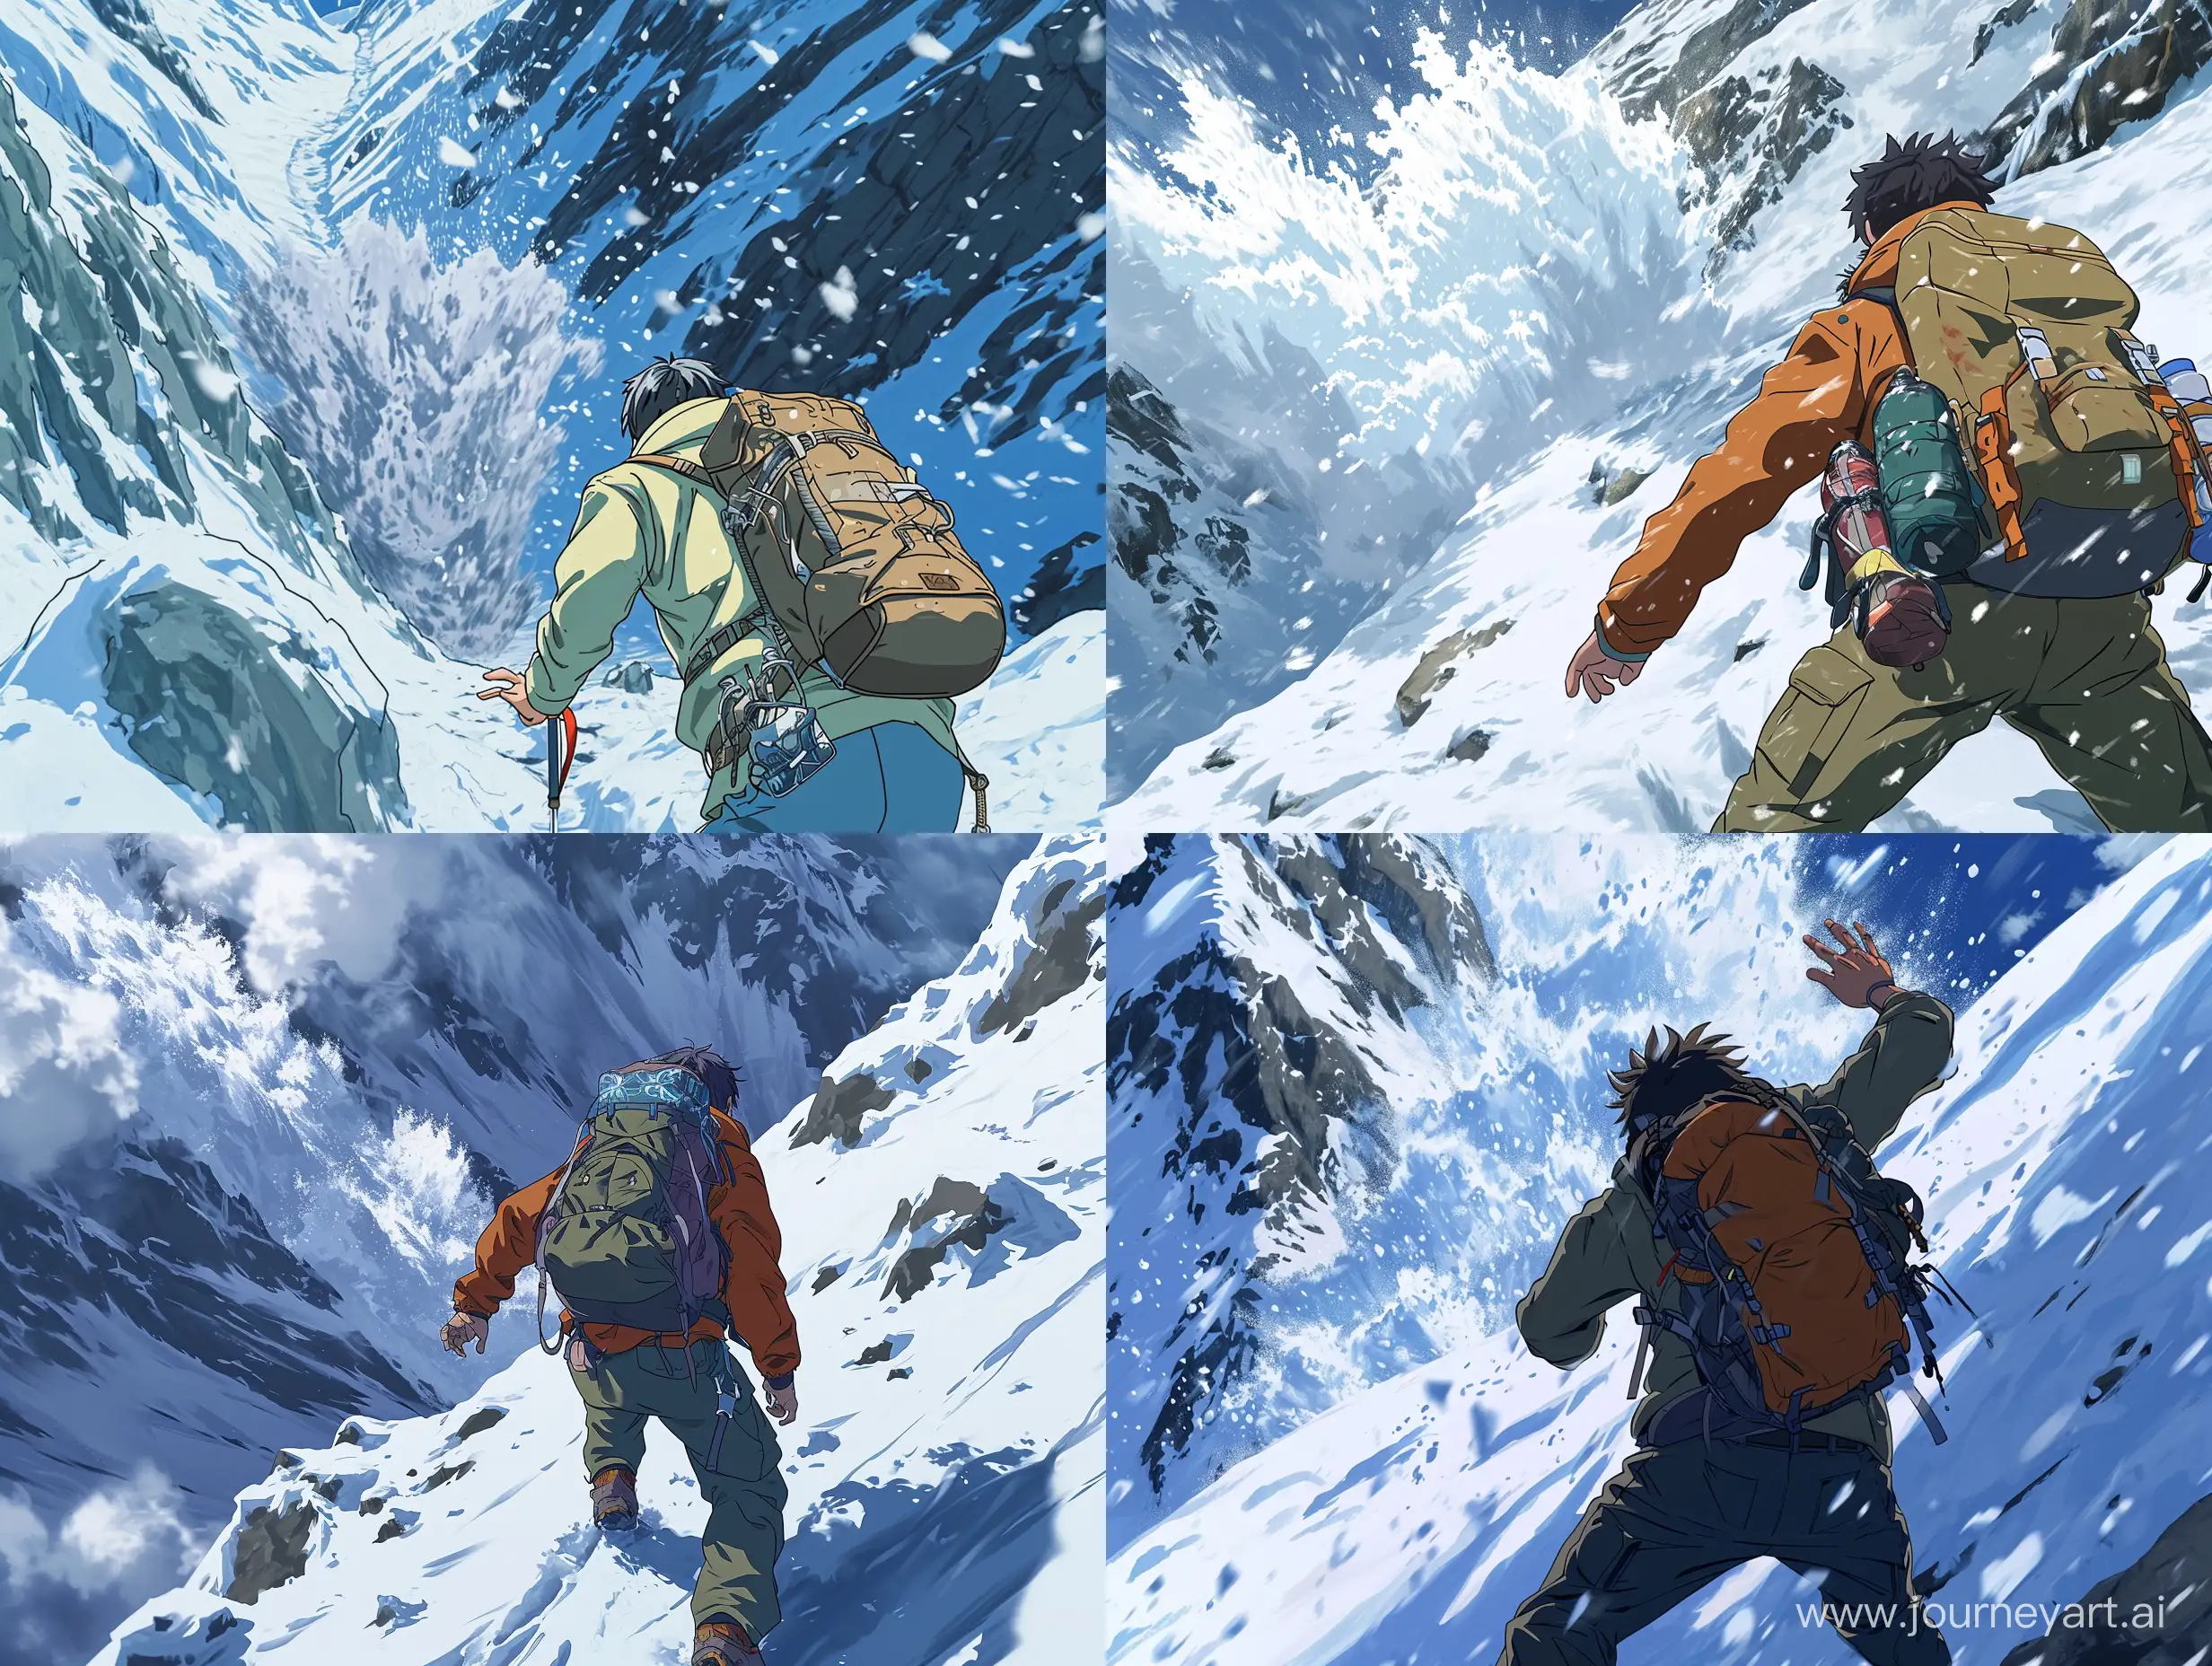 Panic-on-Snowy-Mountain-Detailed-Anime-Scene-with-Hiker-and-Avalanche